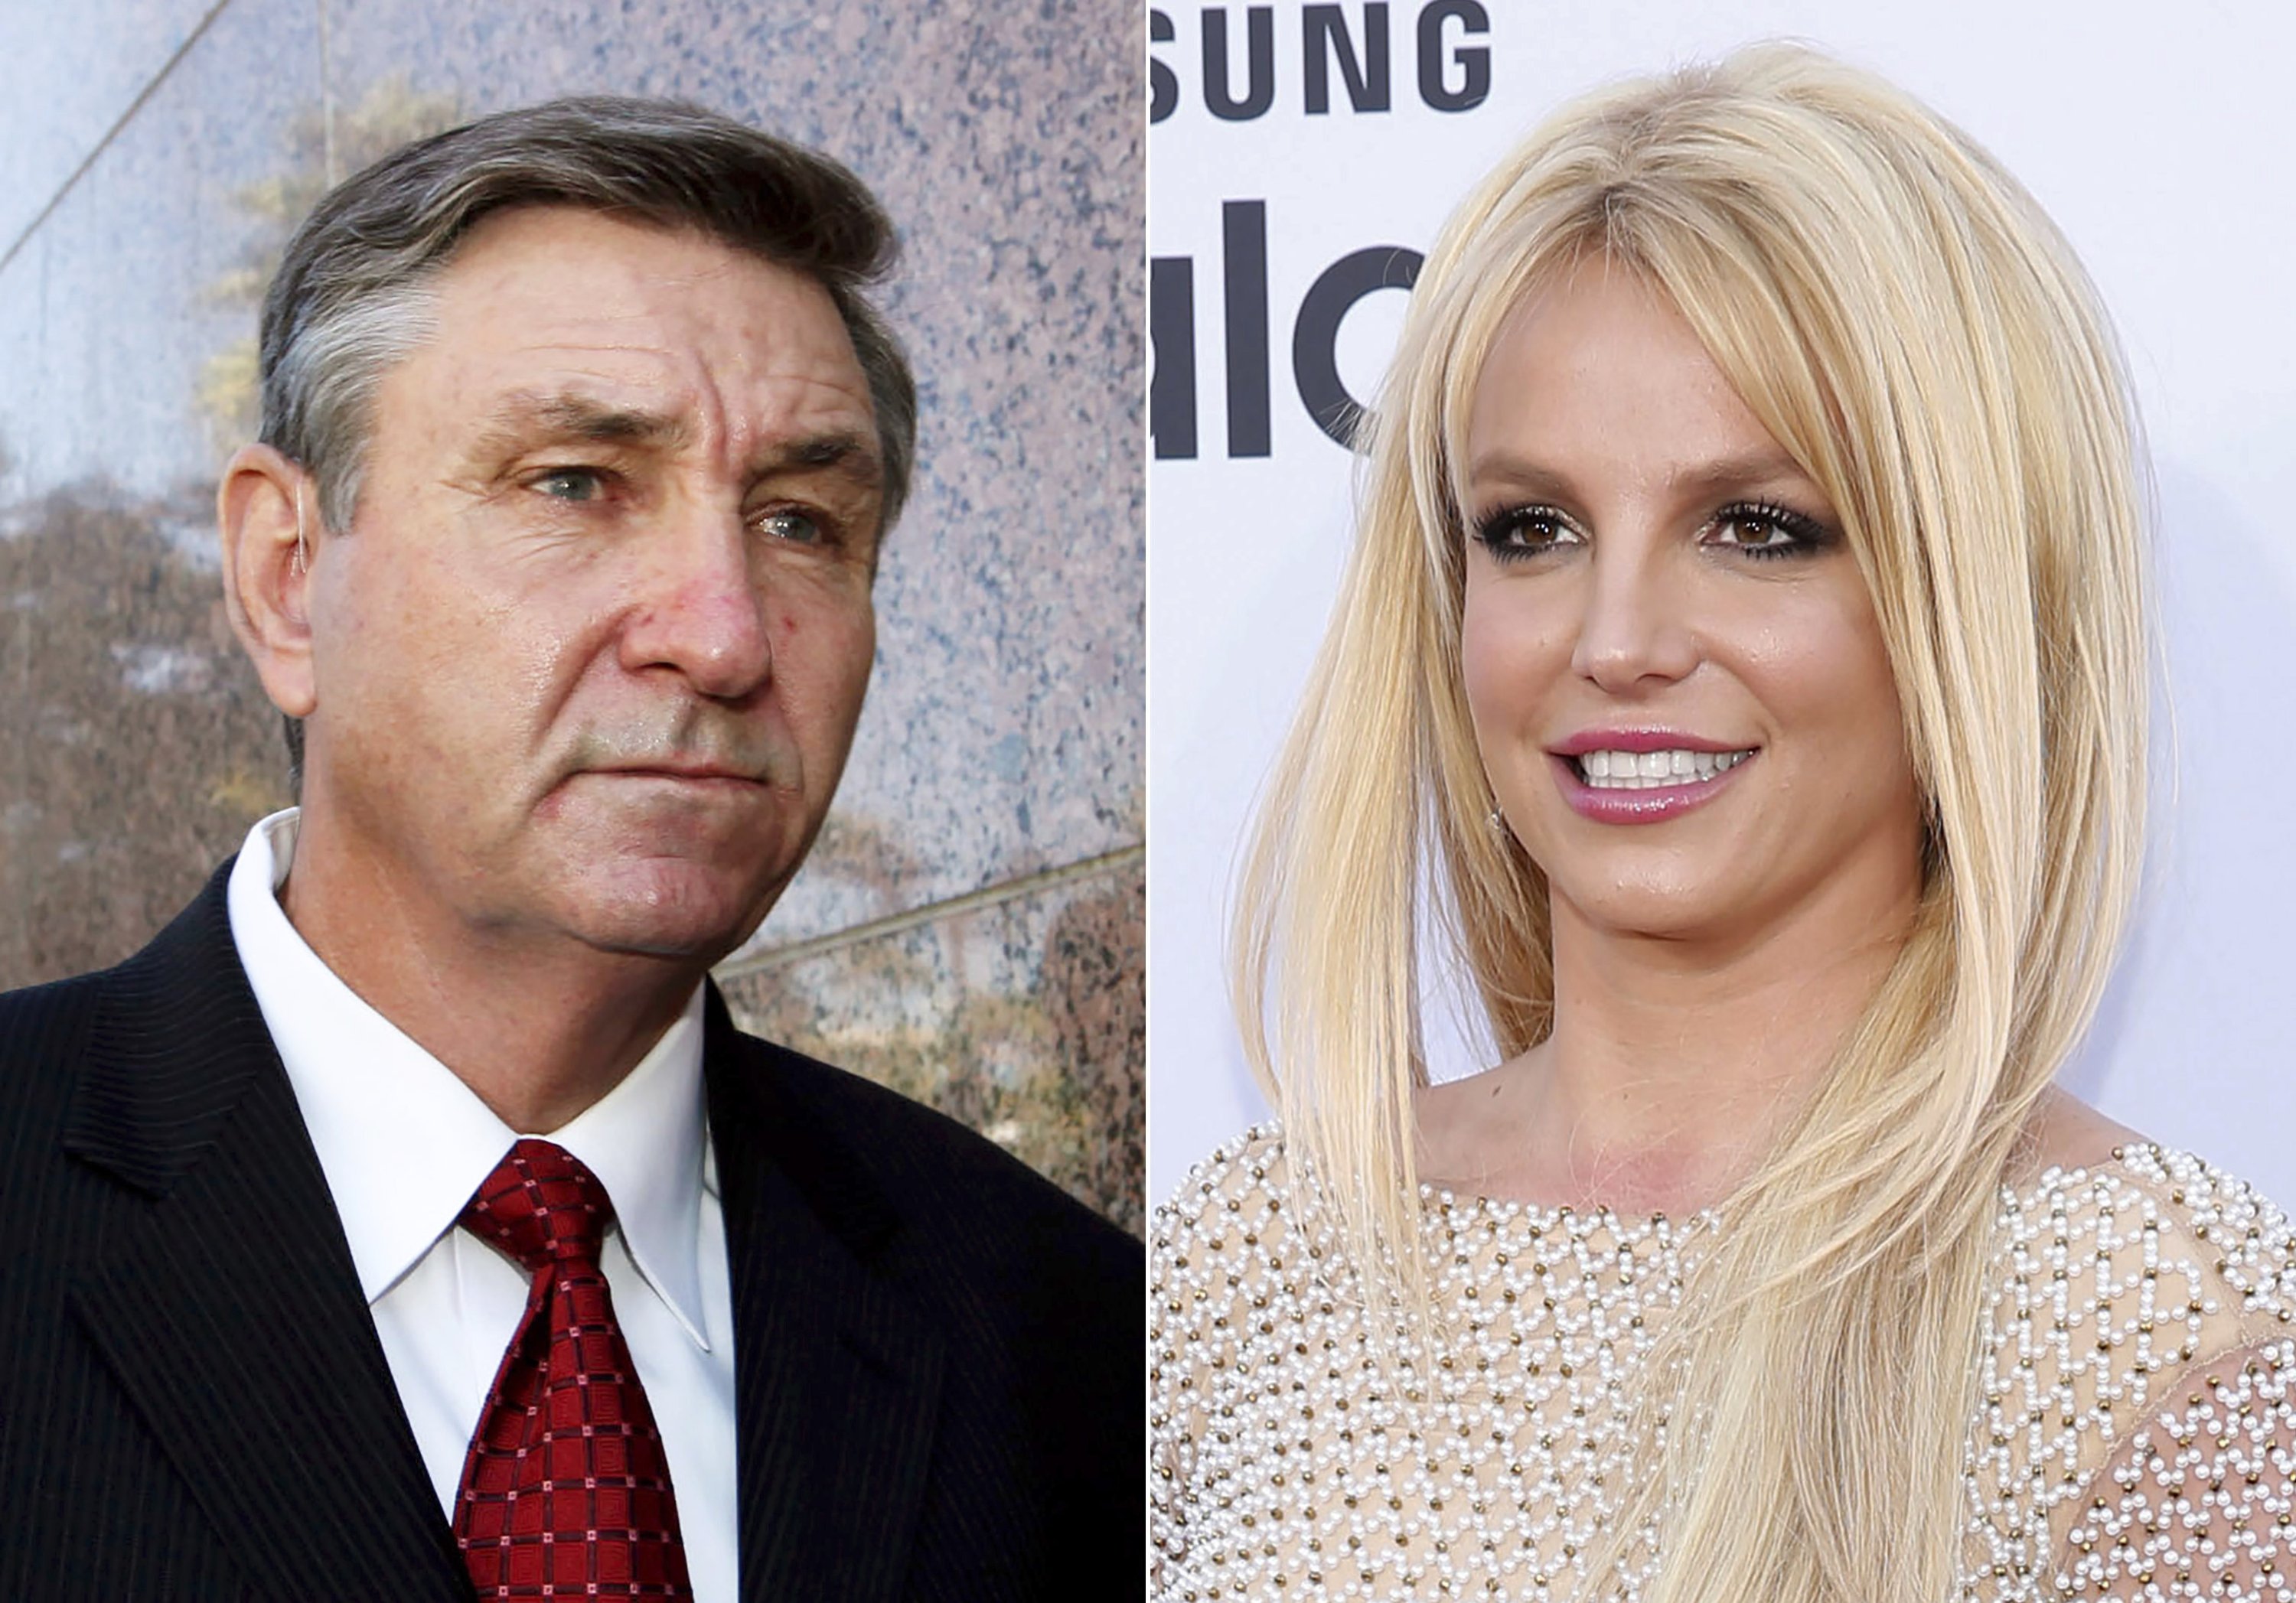 Jamie Spears, father of singer Britney Spears, leaves the Stanley Mosk Courthouse in Los Angeles, U.S. on Oct. 24, 2012, left, and Britney Spears arrives at the Billboard Music Awards in Las Vegas, U.S. on May 17, 2015. (AP Photo)